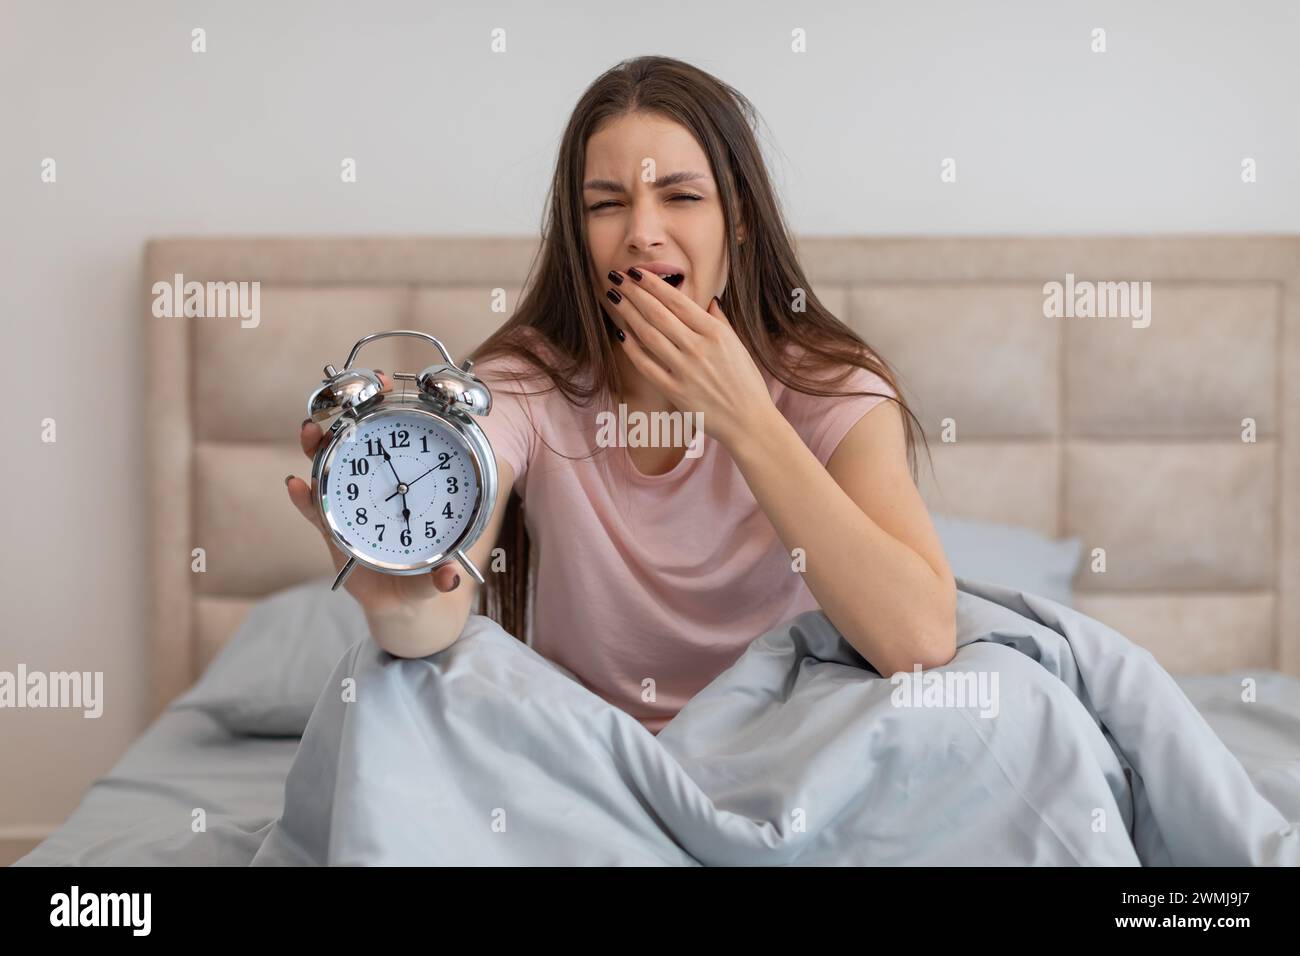 Sleepy woman in bed holding an alarm clock, yawning with tiredness Stock Photo